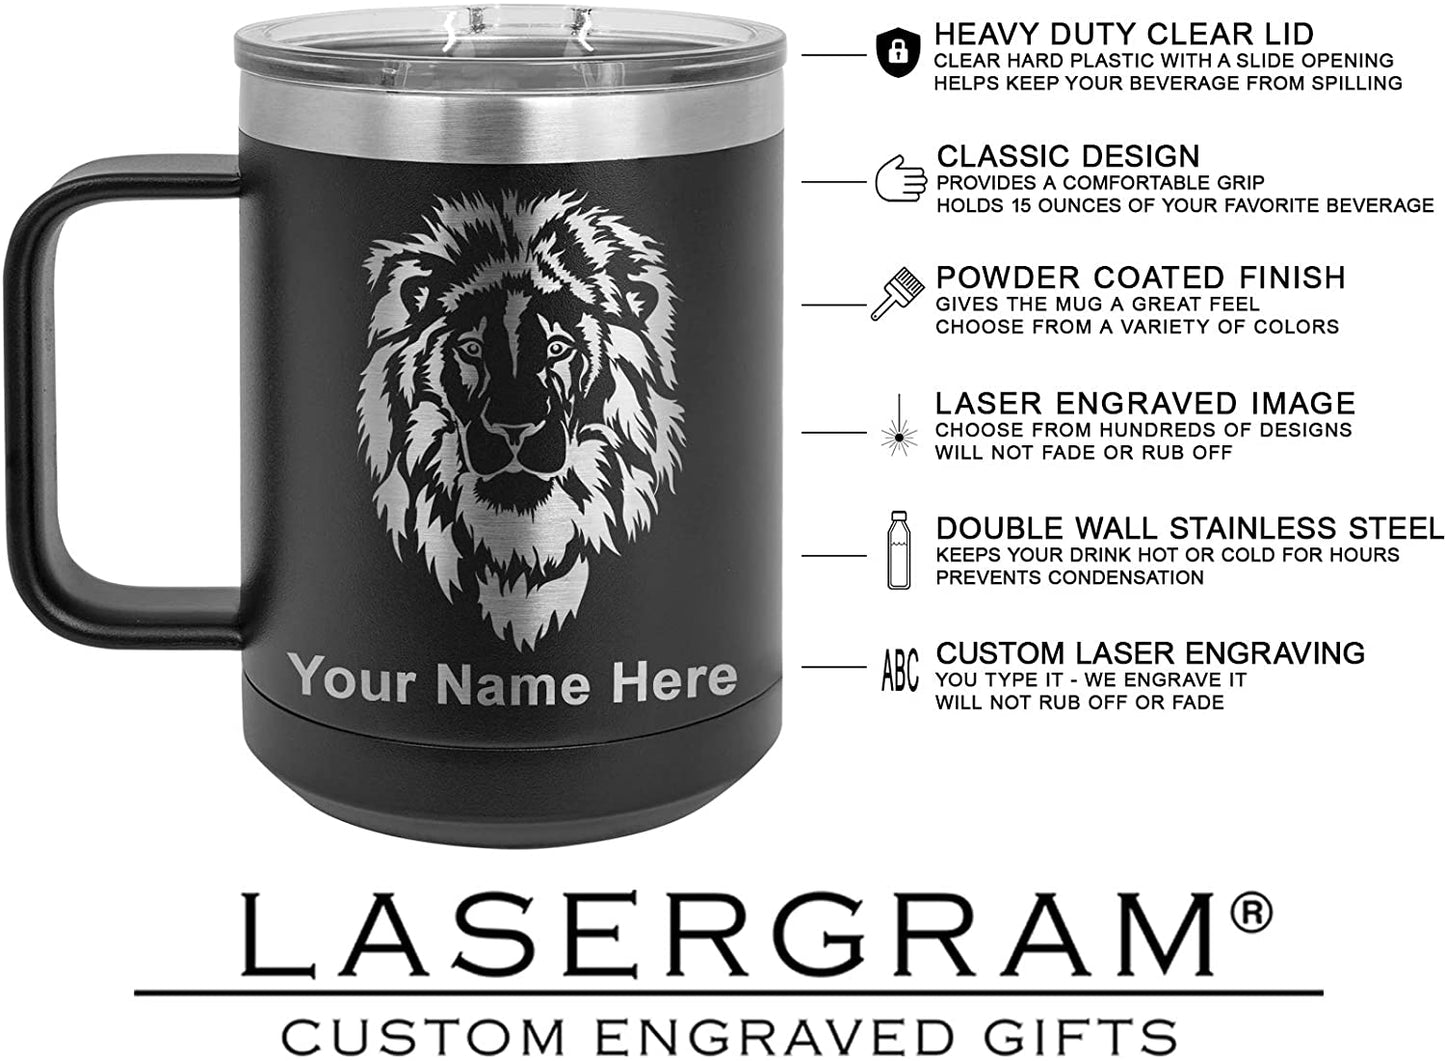 15oz Vacuum Insulated Coffee Mug, King Crown, Personalized Engraving Included